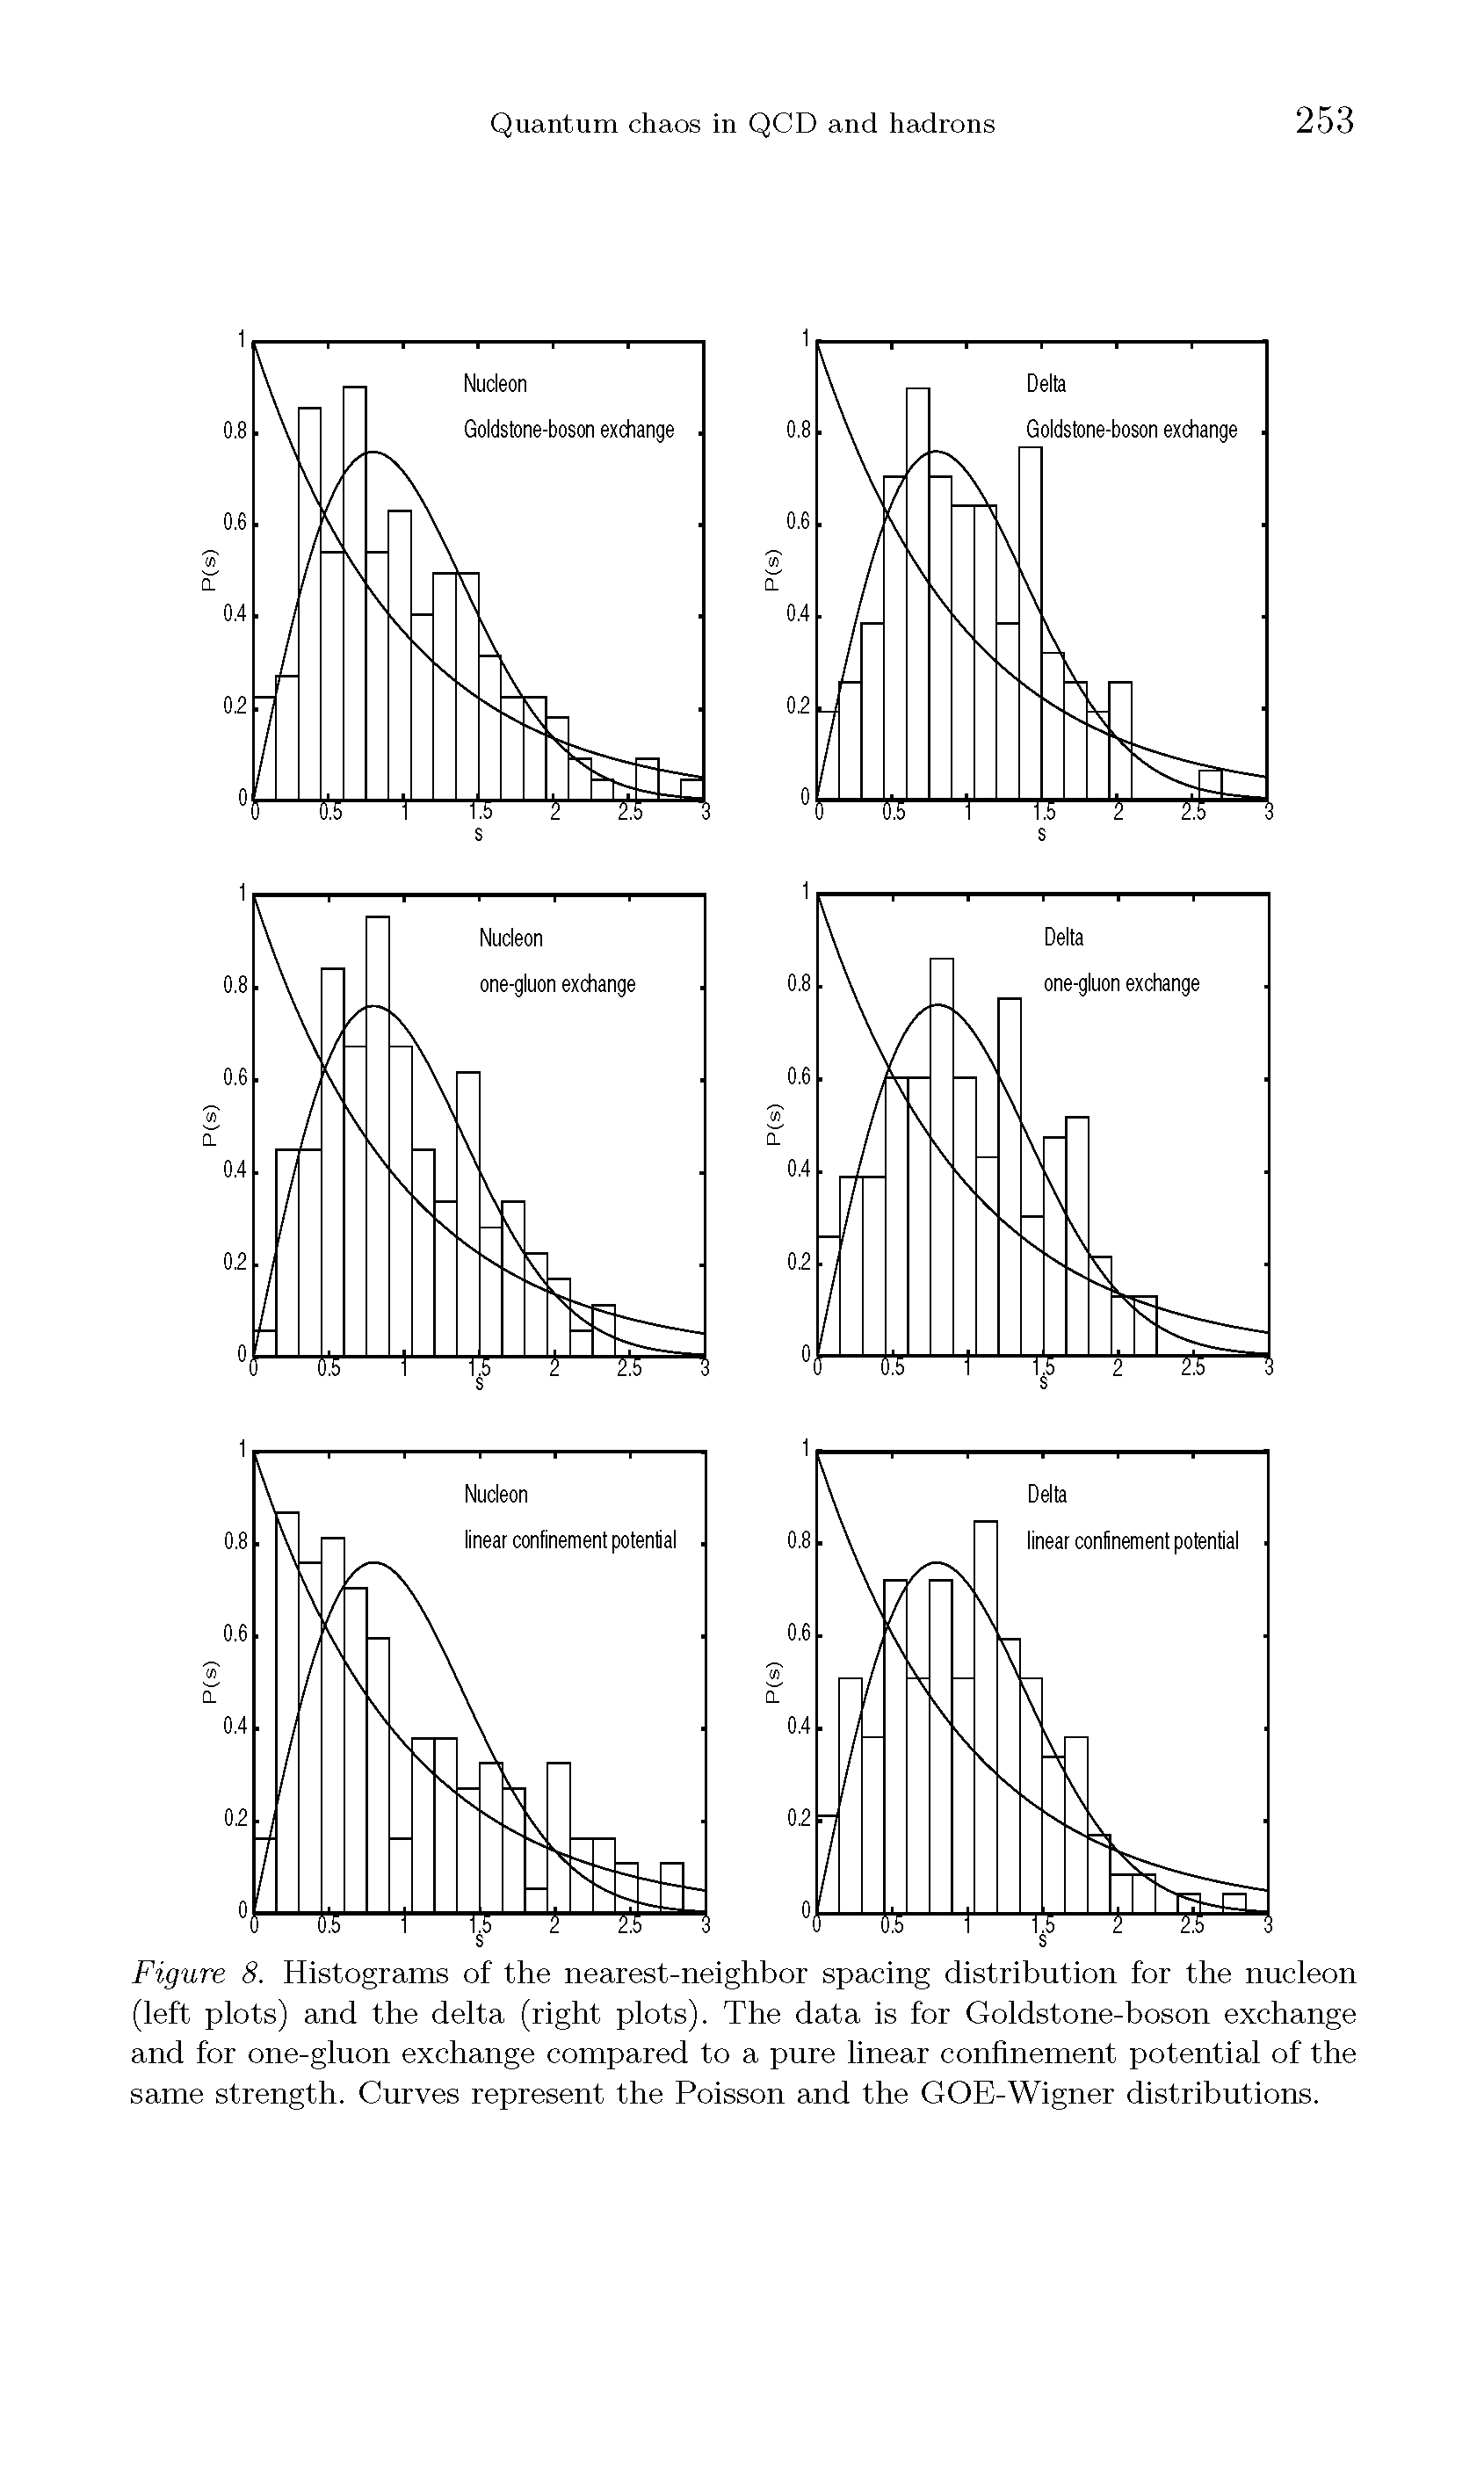 Figure 8. Histograms of the nearest-neighbor spacing distribution for the nucleon (left plots) and the delta (right plots). The data is for Goldstone-boson exchange and for one-gluon exchange compared to a pure linear confinement potential of the same strength. Curves represent the Poisson and the GOE-Wigner distributions.